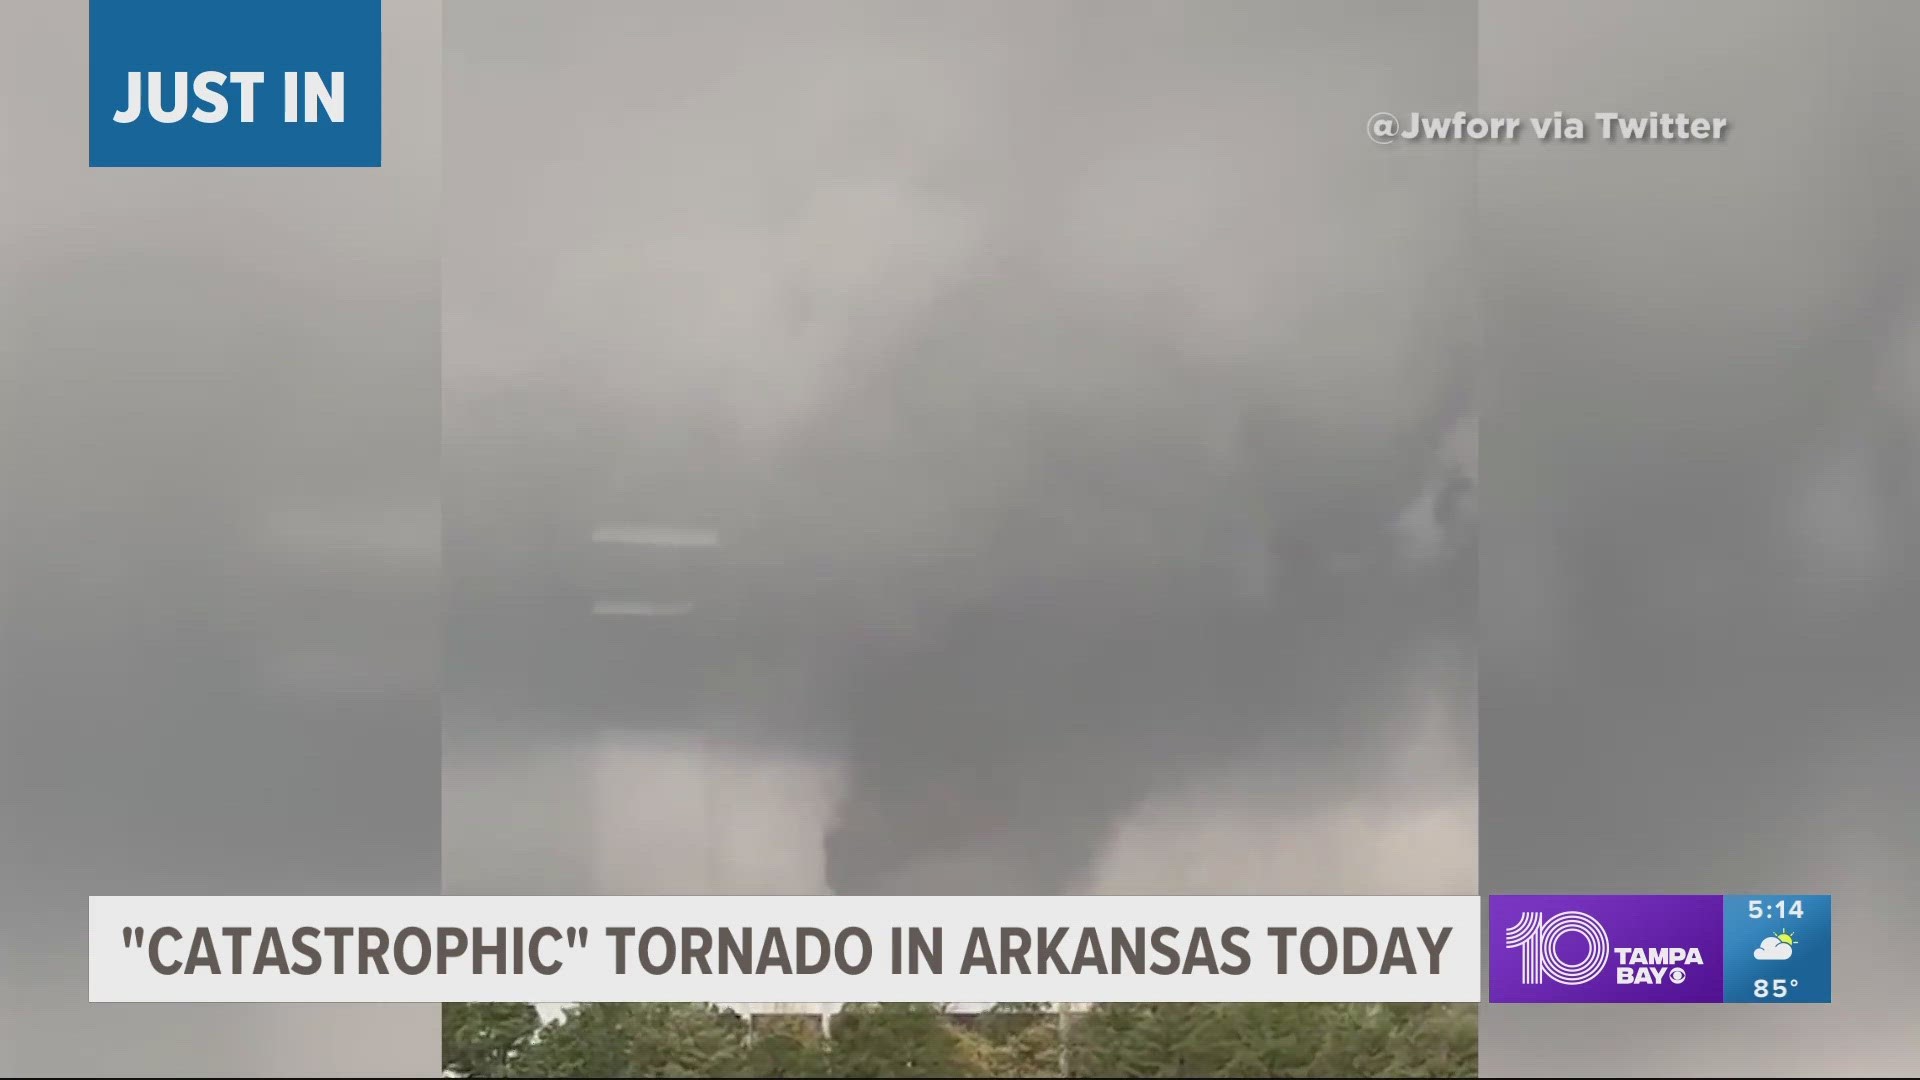 Little Rock was hit by what's being called a 'catastrophic' tornado on Friday as severe storms moved throughout Arkansas.